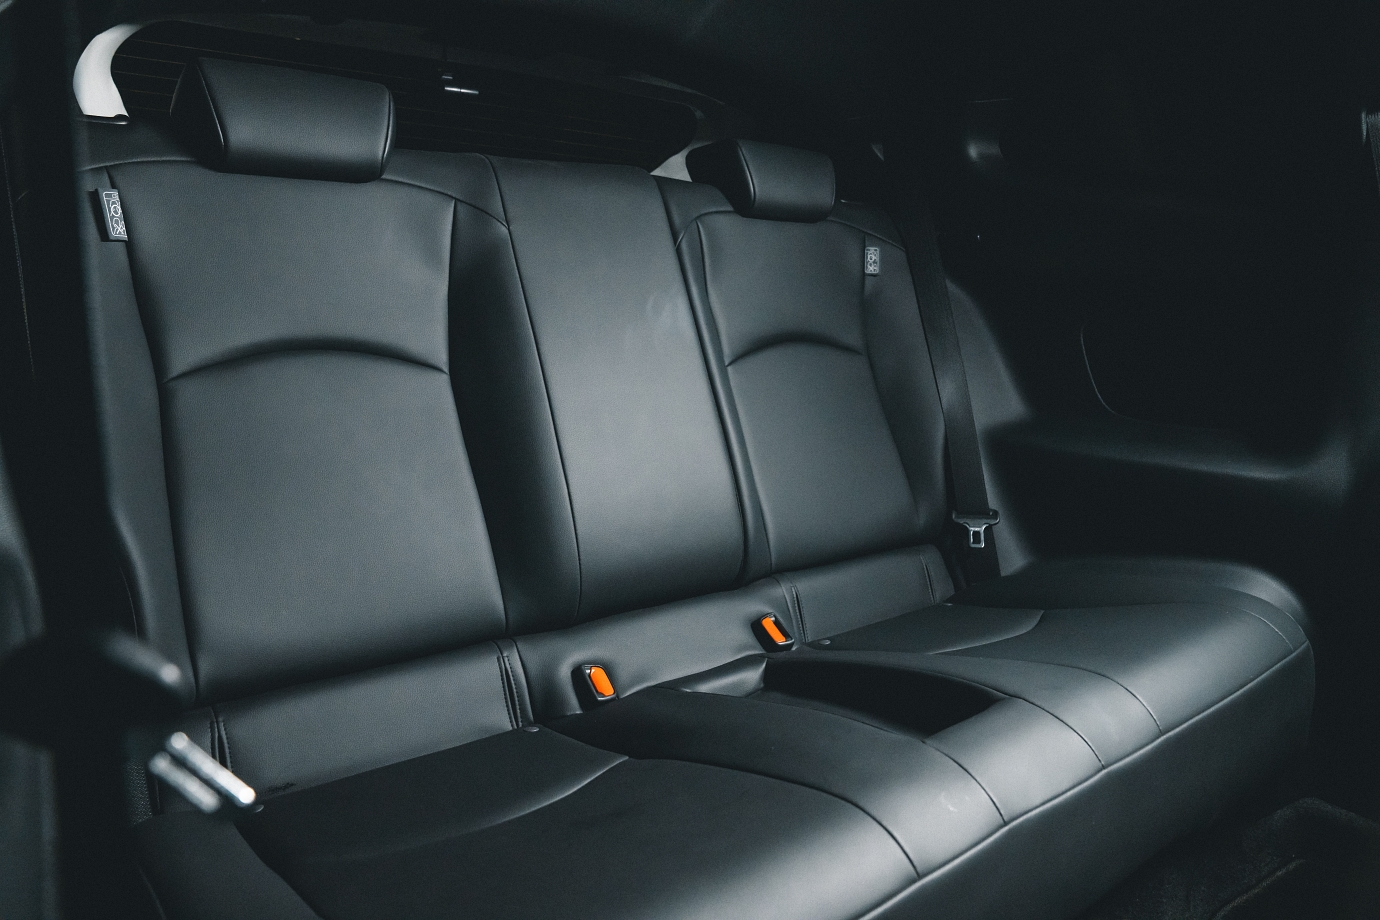 rear seats too! what more could you ask for?